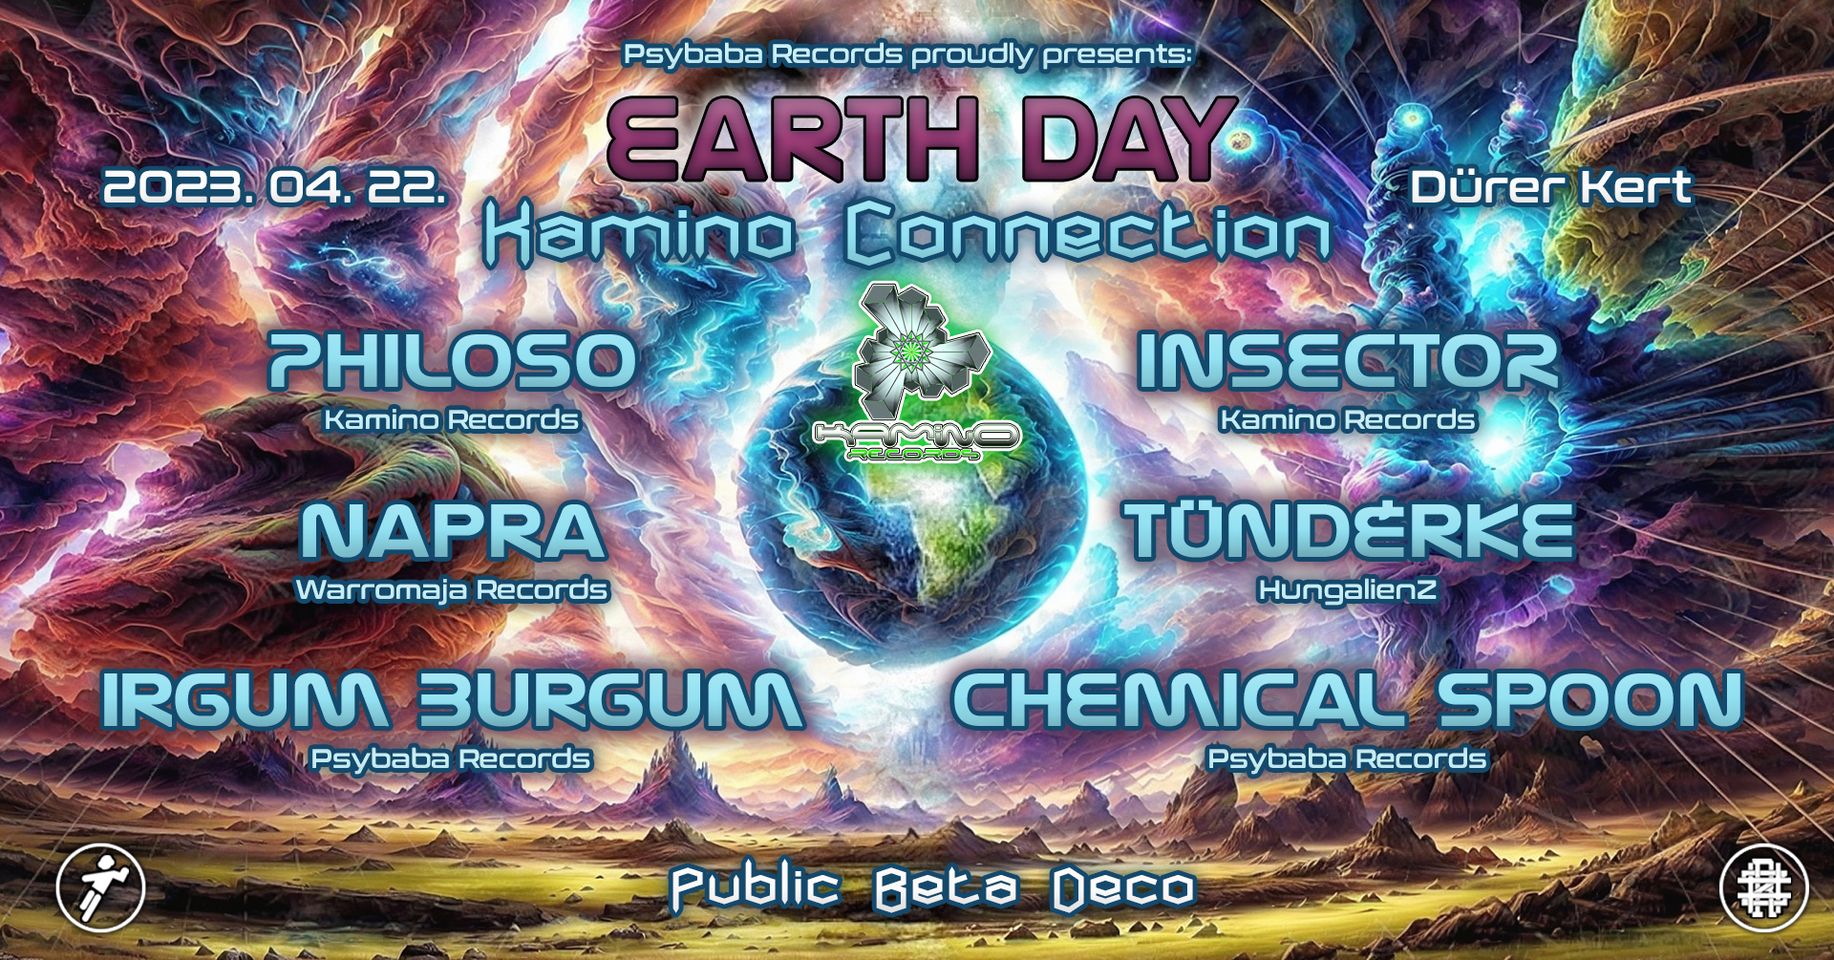 Psybaba Records Presents : Earth Day II Kamino Connection